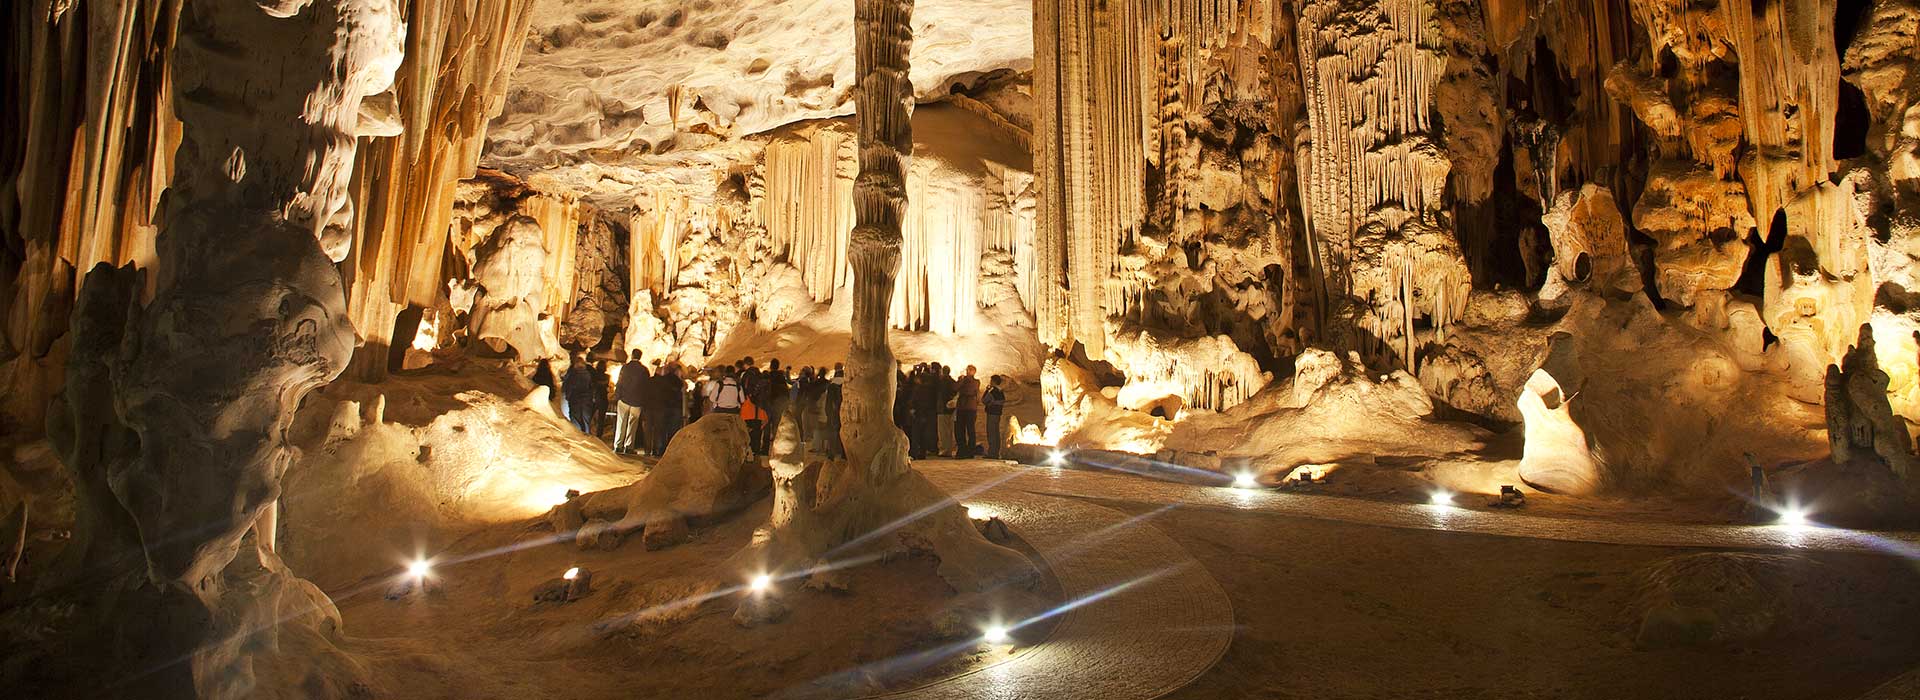 cango-caves south africa